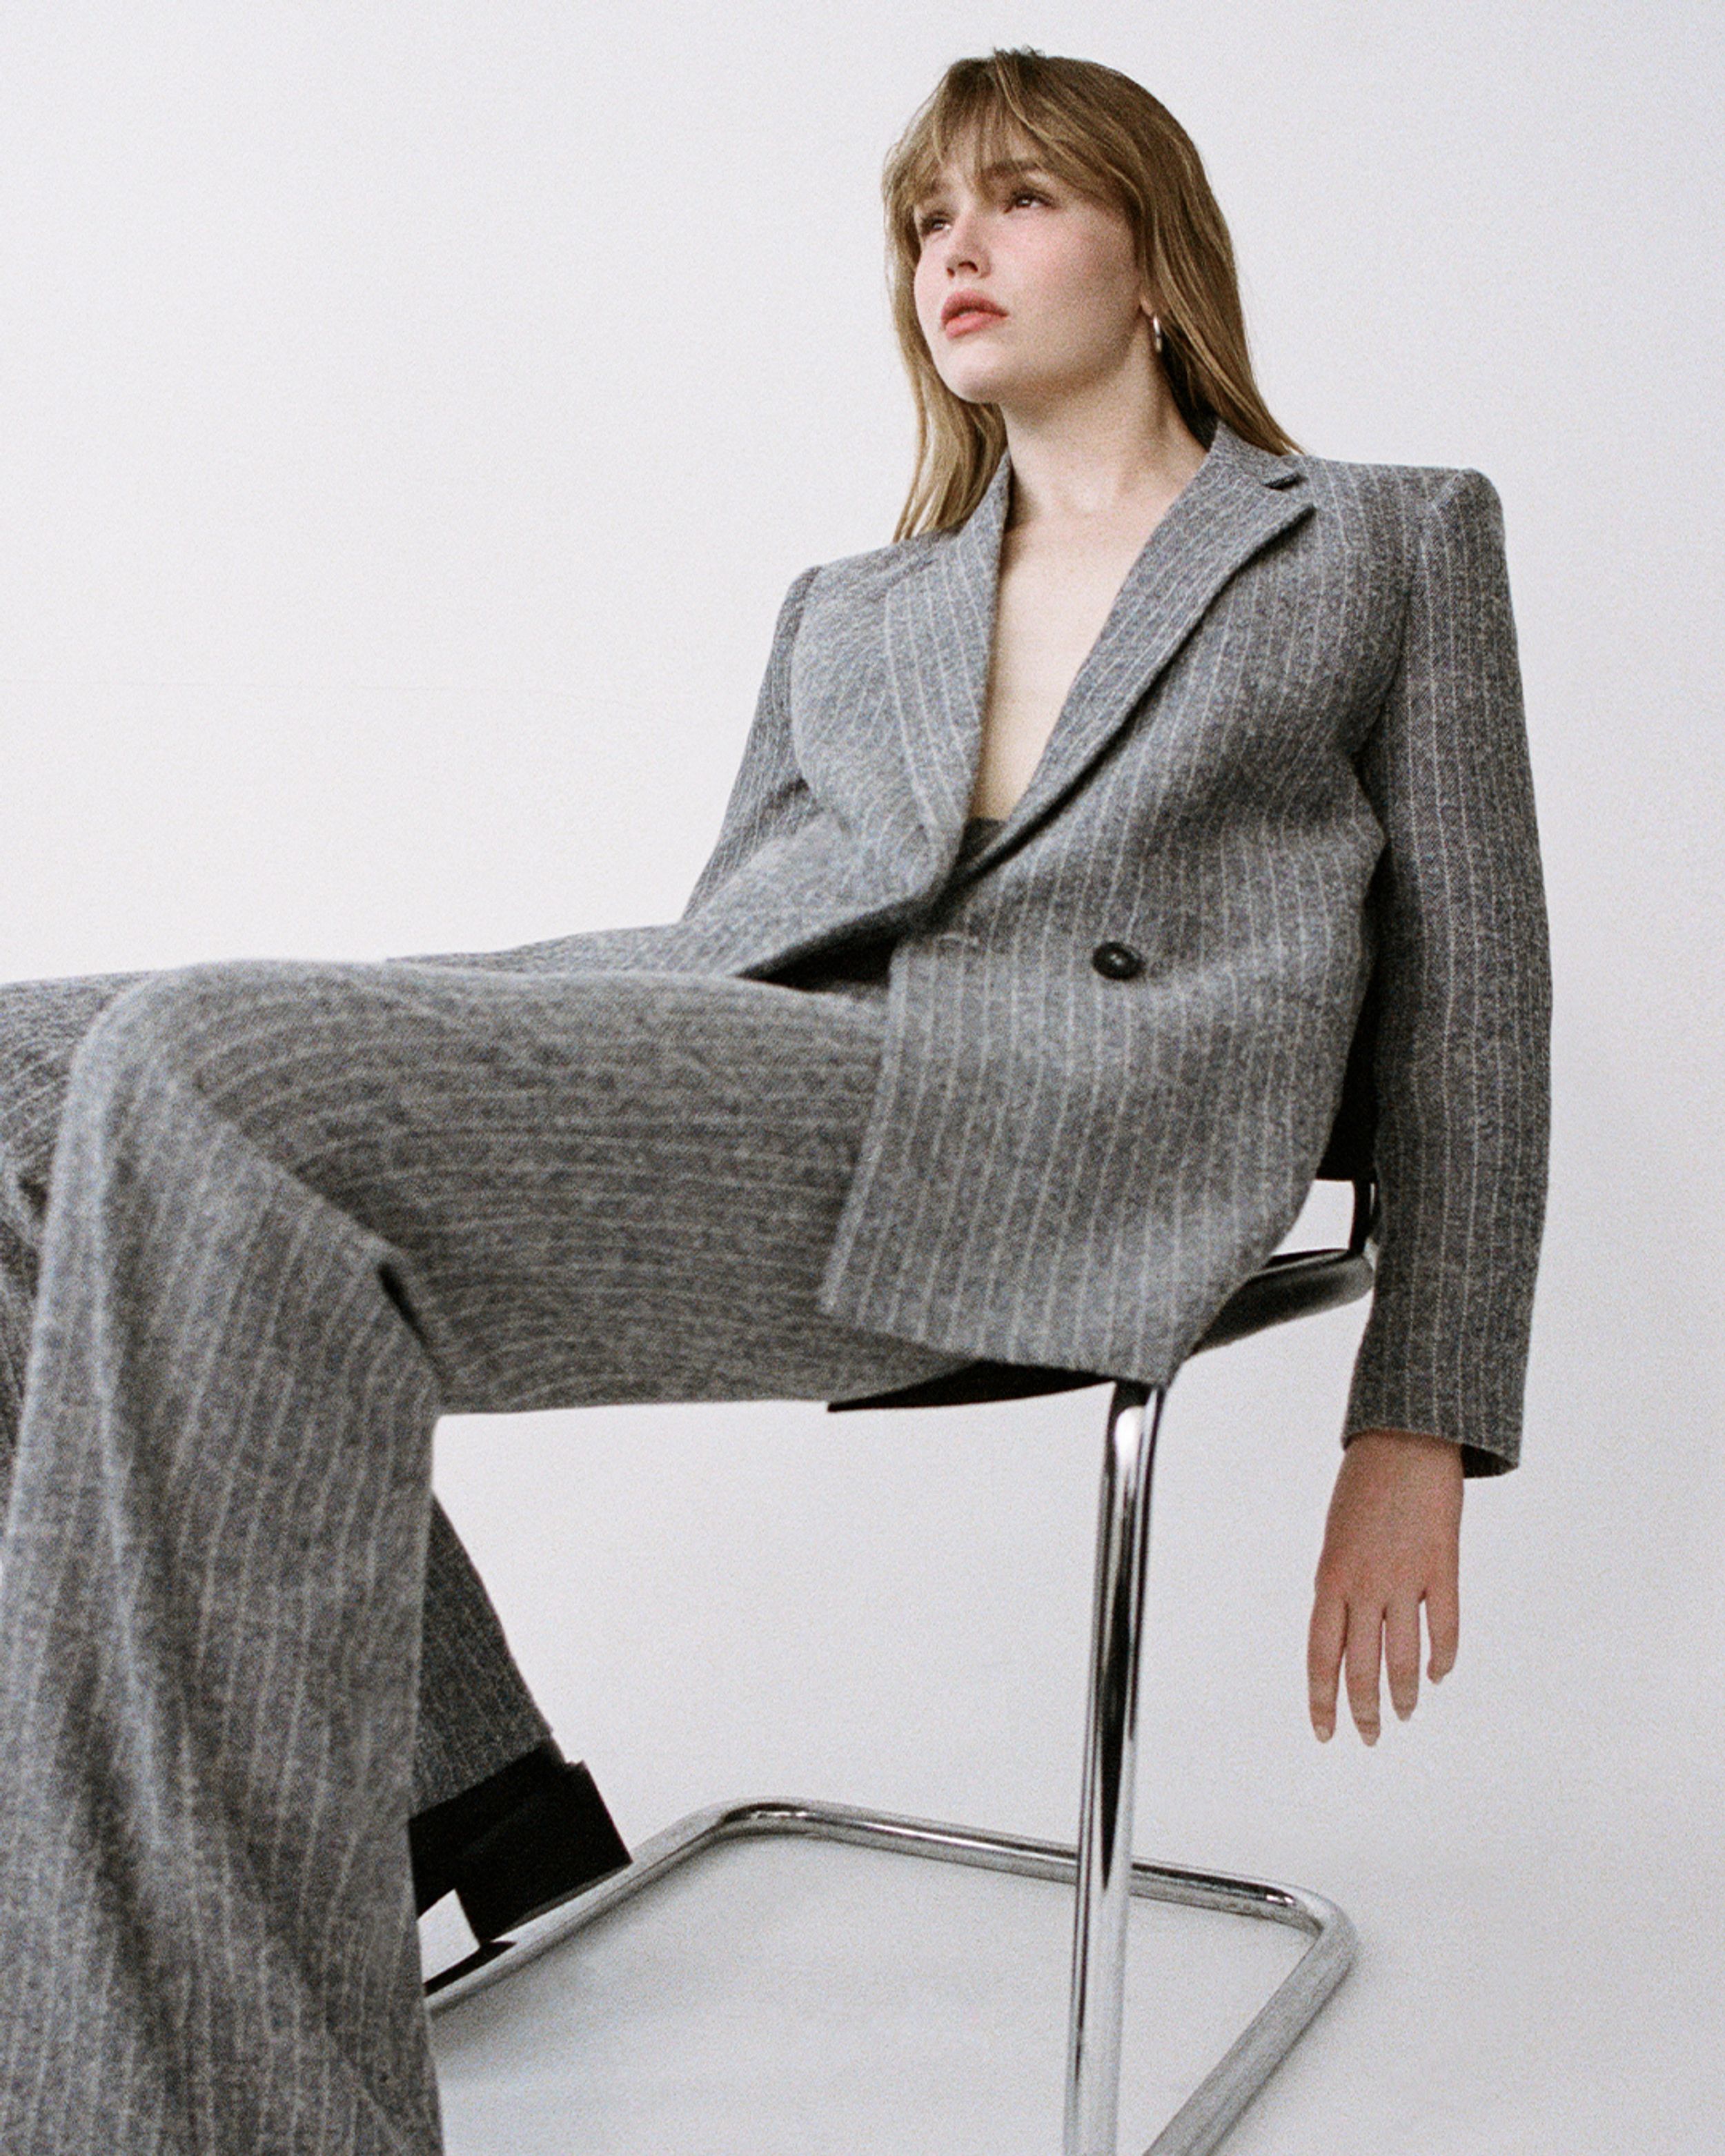 Maddison Brown sitting in a chair wearing a grey pinstripe suit